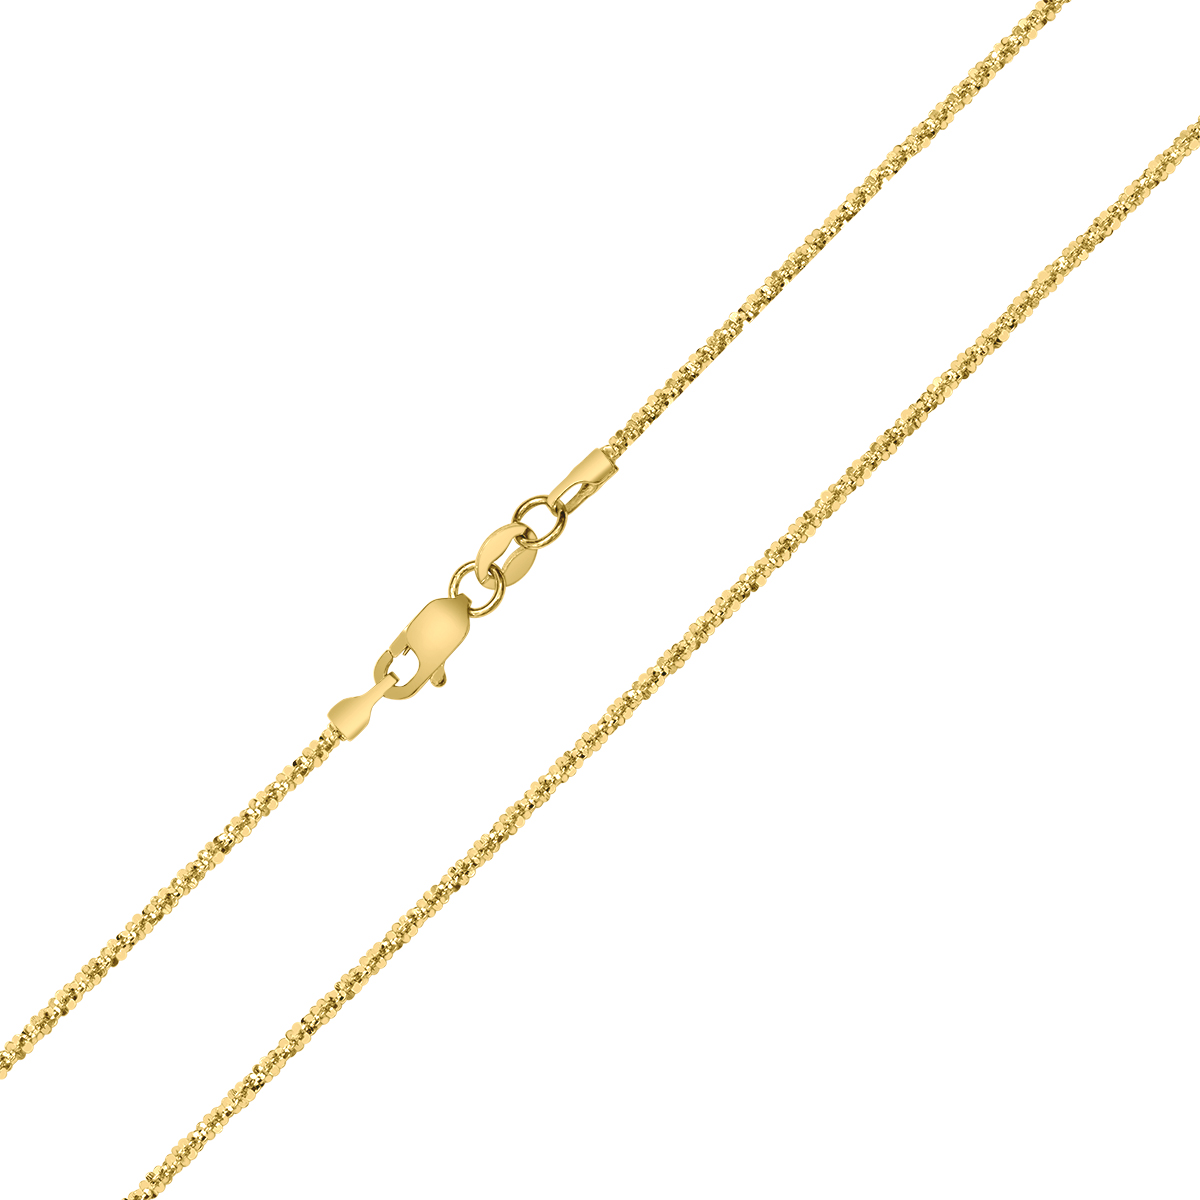 10K Yellow Gold 1.5MM Sparkle Chain with Lobster Clasp - 16 Inch